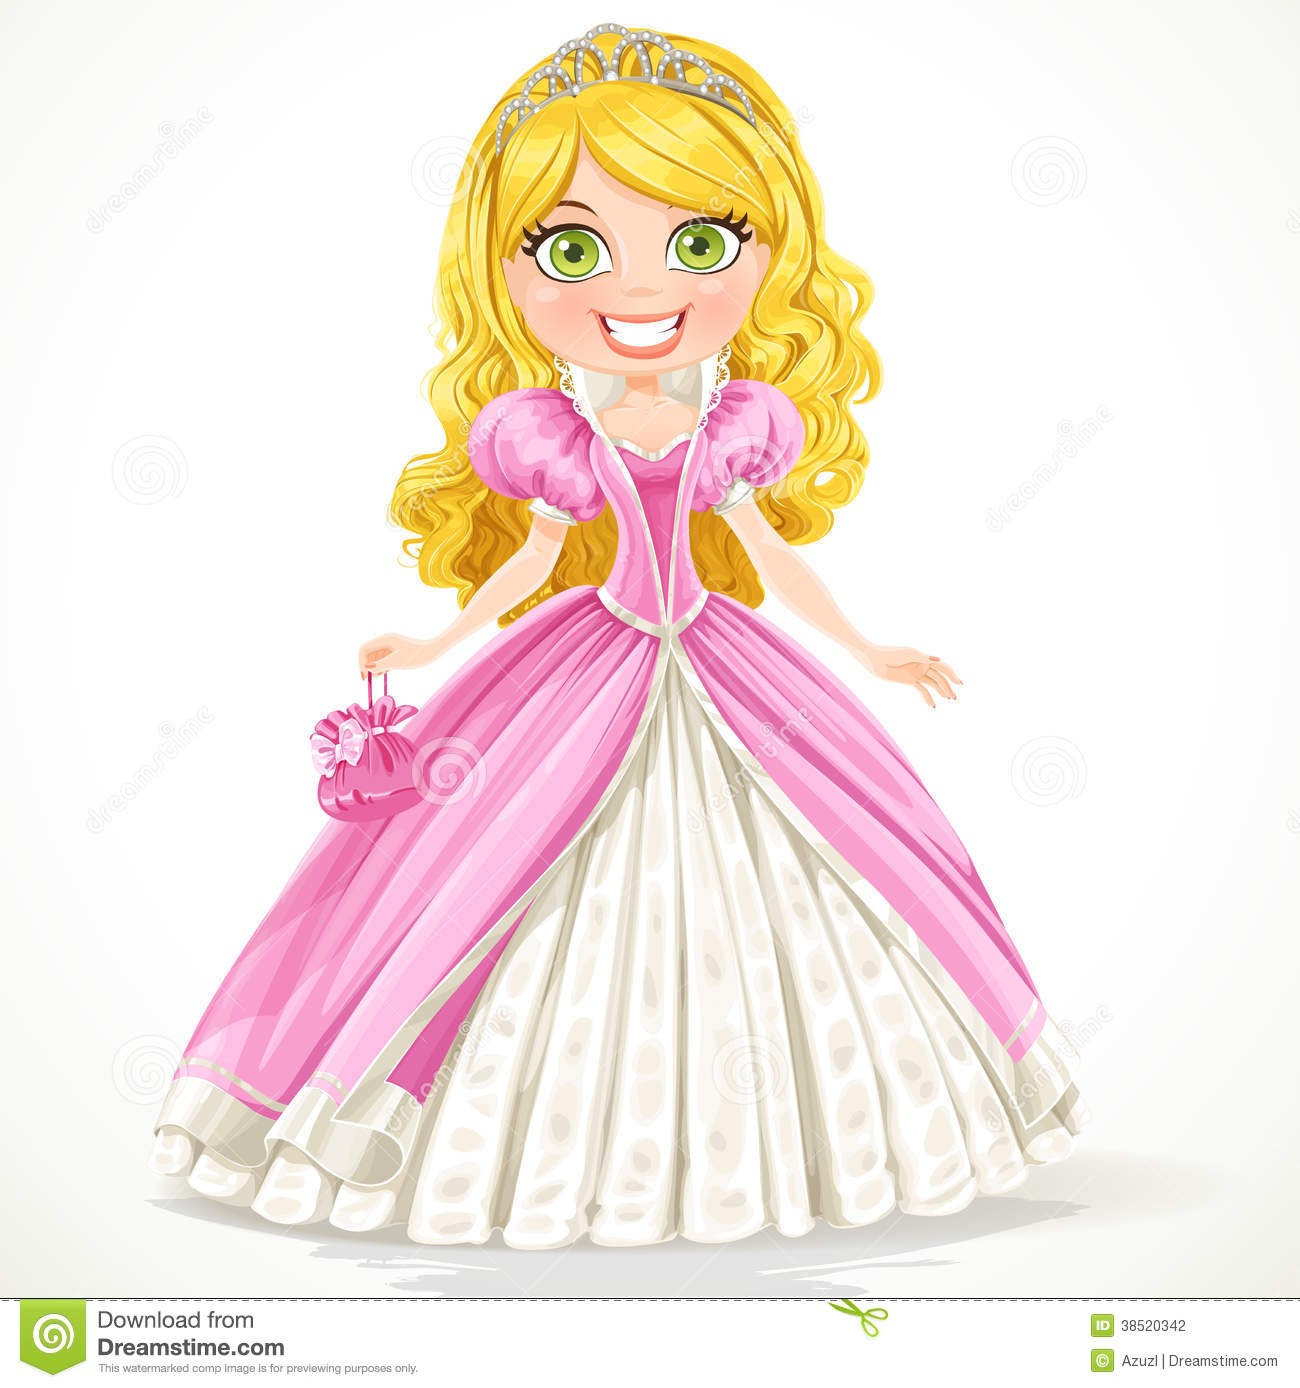 Illustration girl dressed royalty. Beautiful clipart ball gown